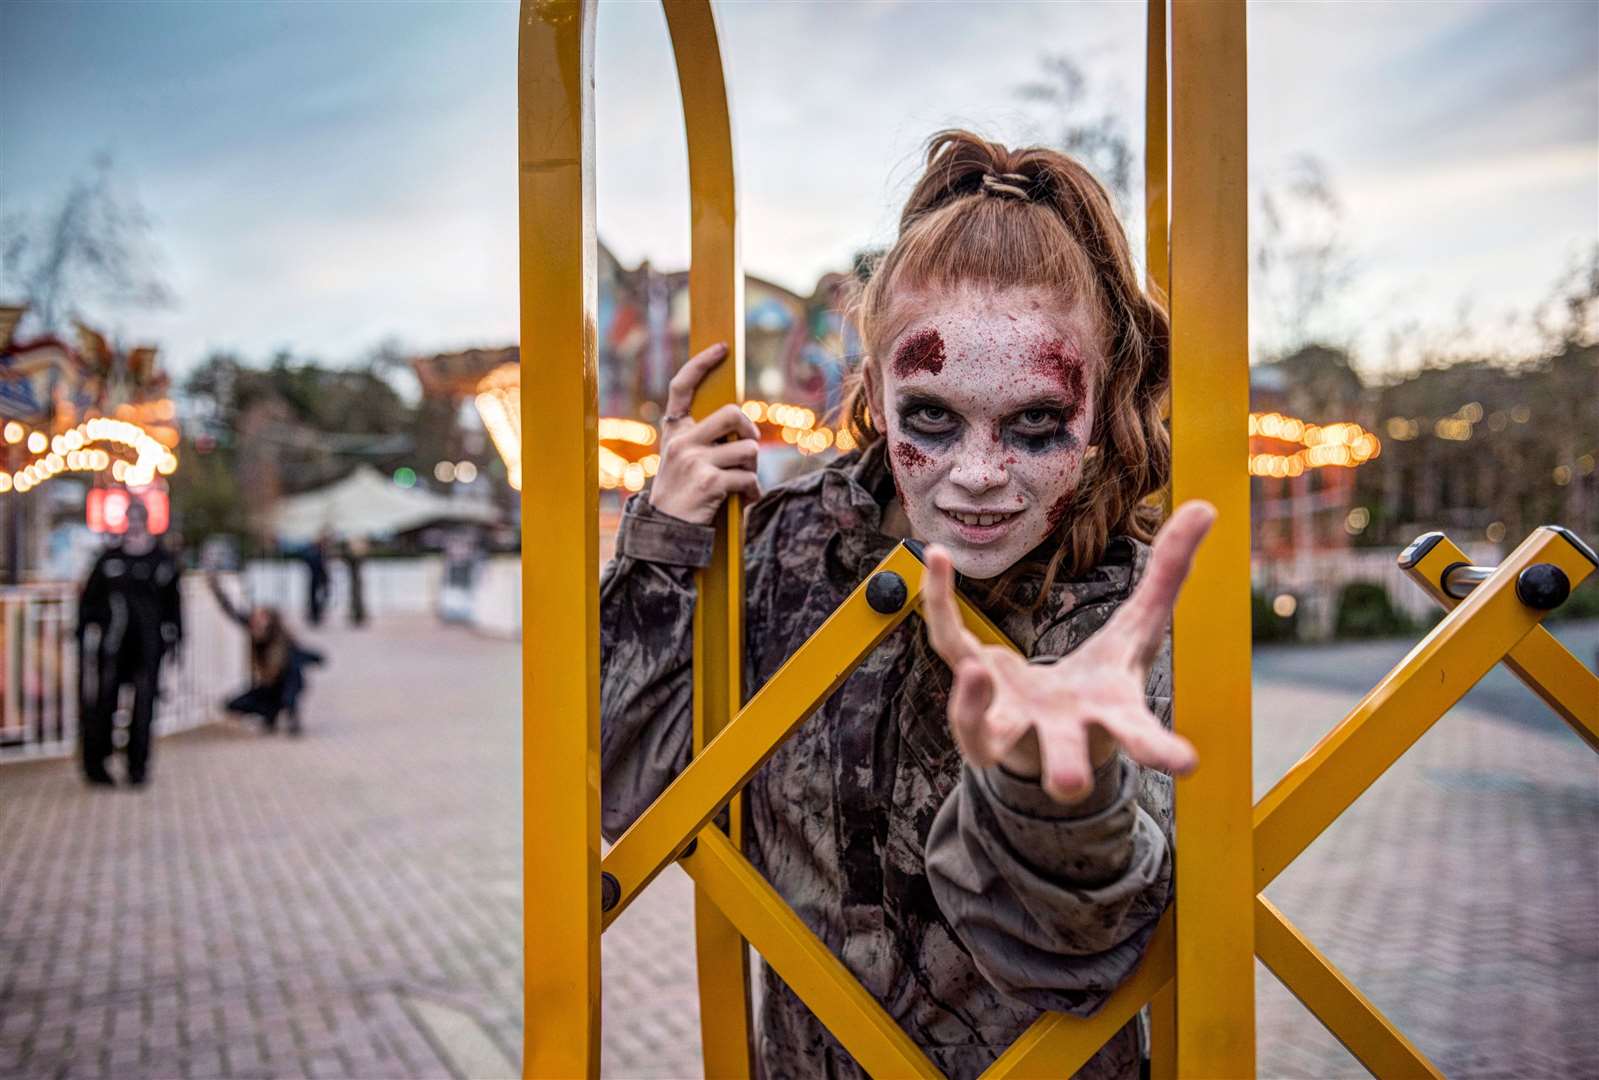 Screamland is one of Dreamland's main events of the year